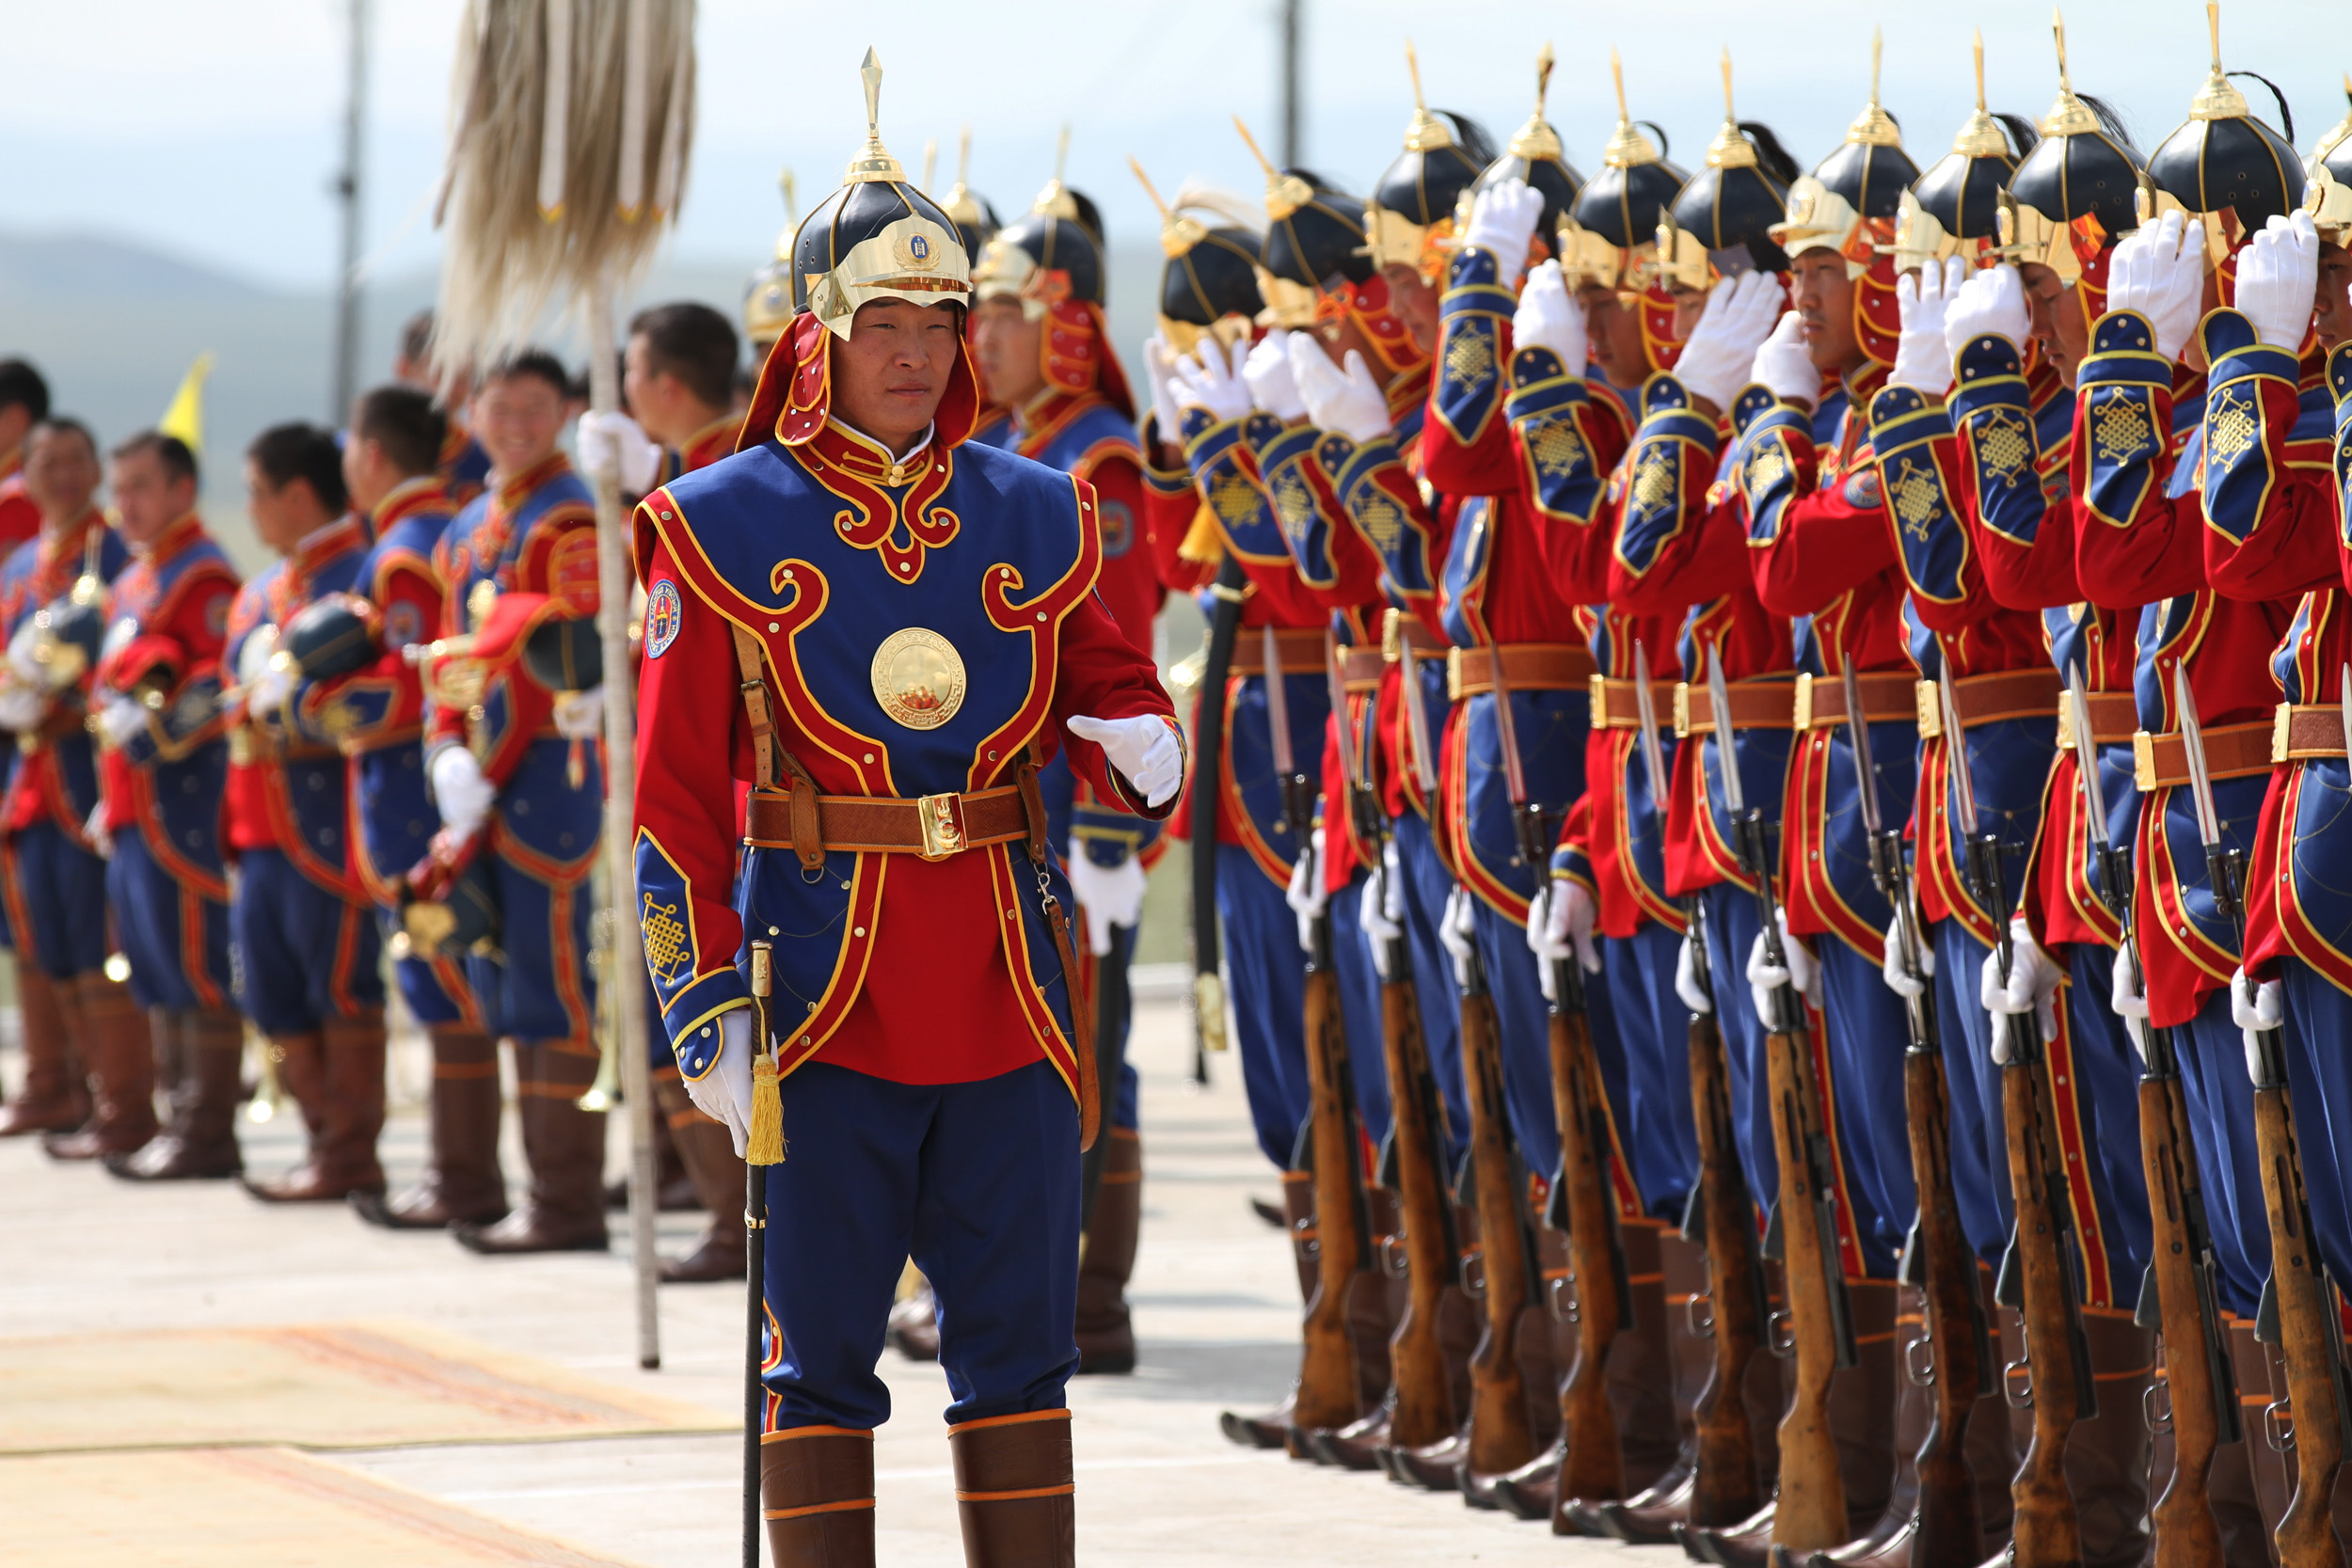 There is little trace of Cactar, but we could imagine him as this members of the Mongolian Armed Forces Honorary Guard